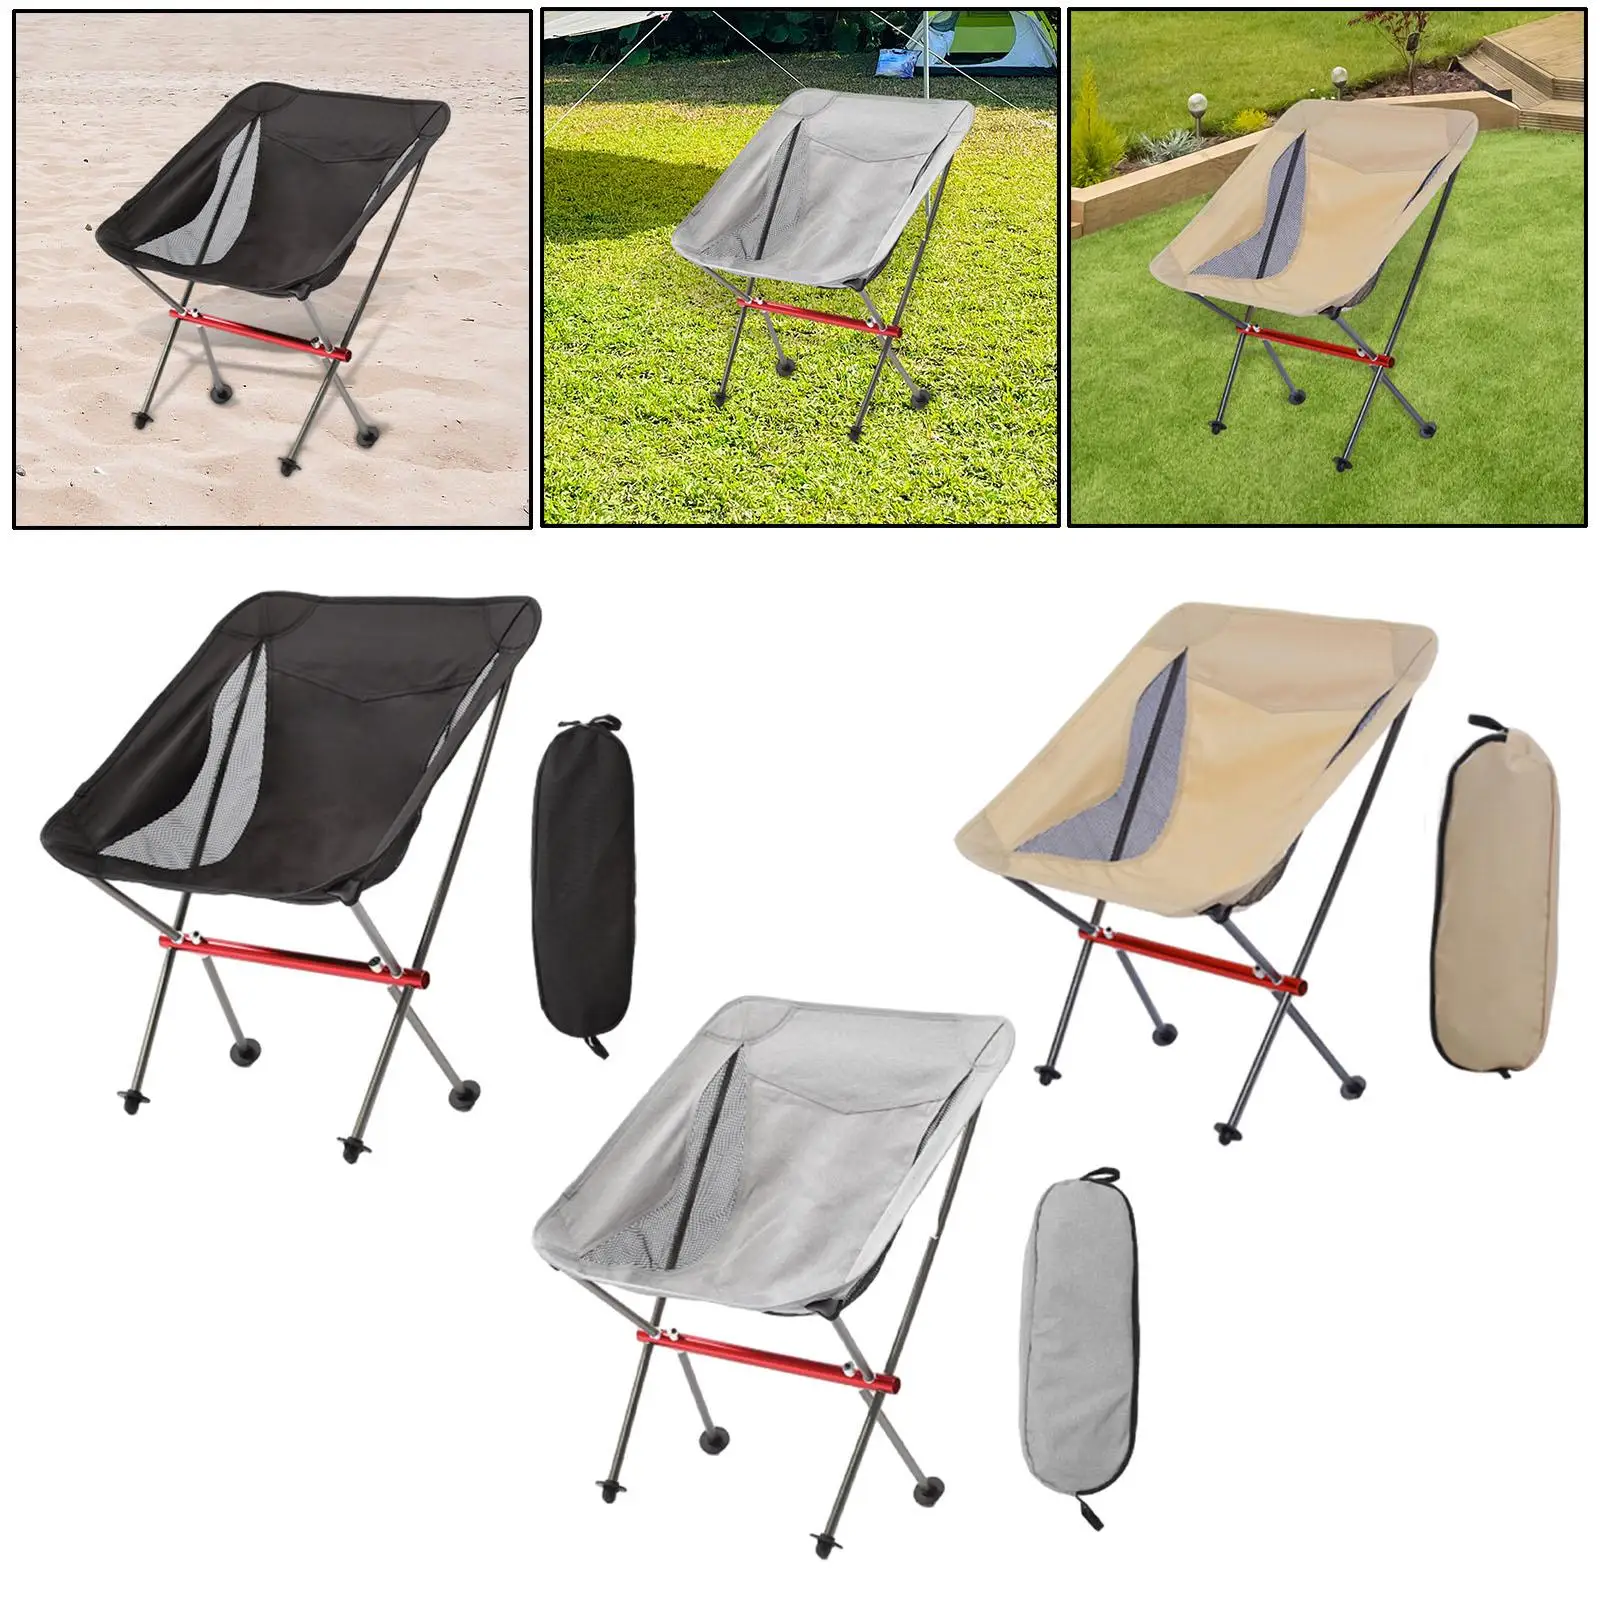 Folding Camping Chair Practical Collapsible with Carrying Bag Portable Folding Chair for Park Picnics Barbecue Yard Garden